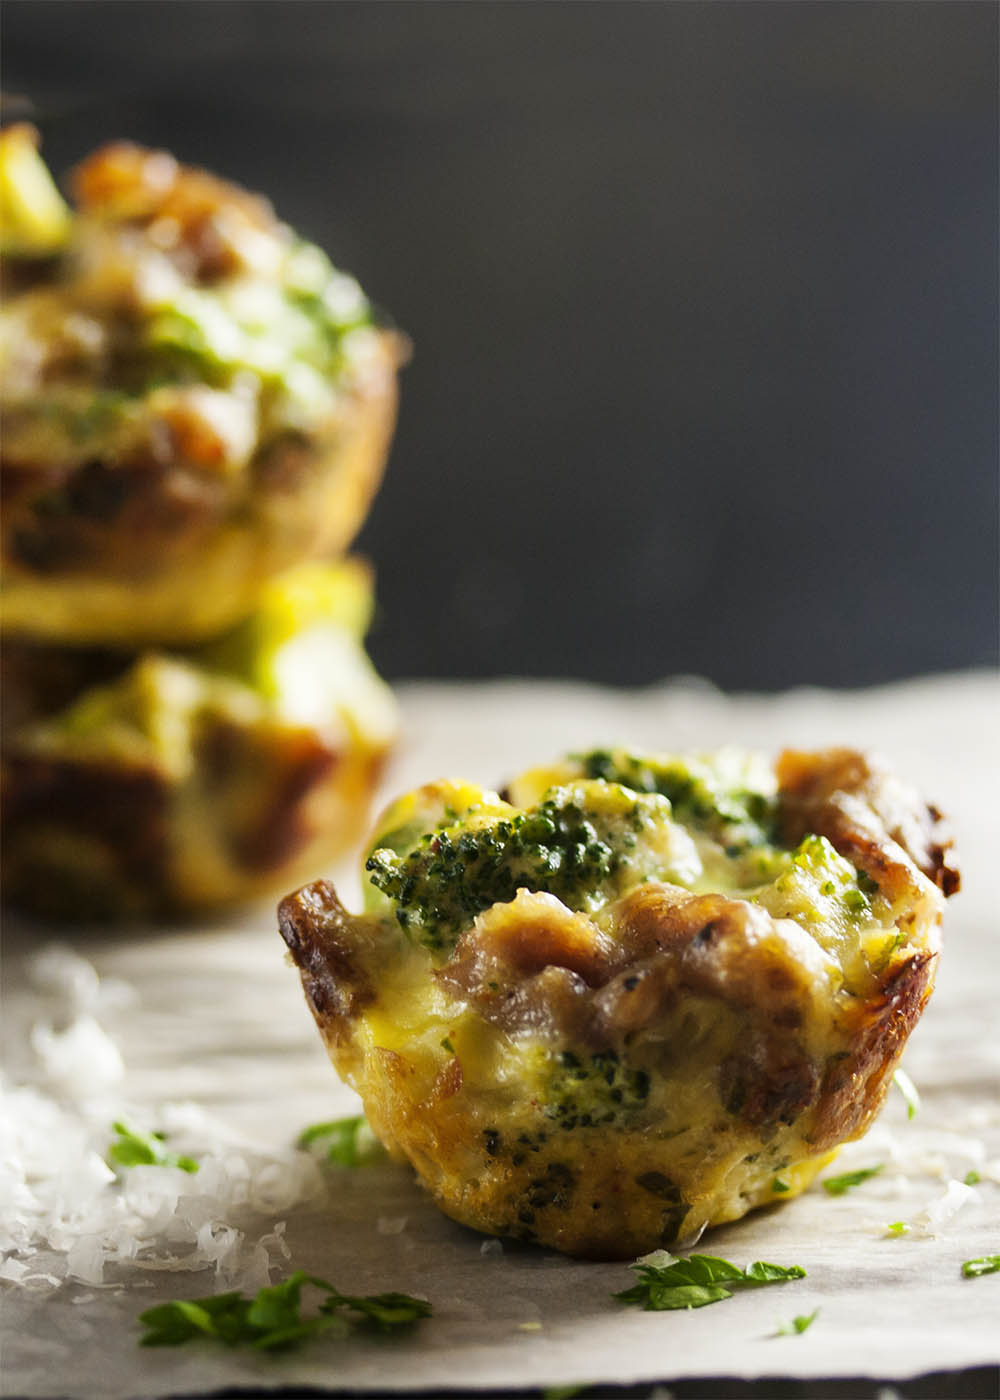 Three Cheese Broccoli Bites - Italian sausage and ricotta combine with broccoli and even more cheese to pack a pile of flavor into each little bite. Excellent as a side dish or an appetizer! | justalittlebitofbacon.com